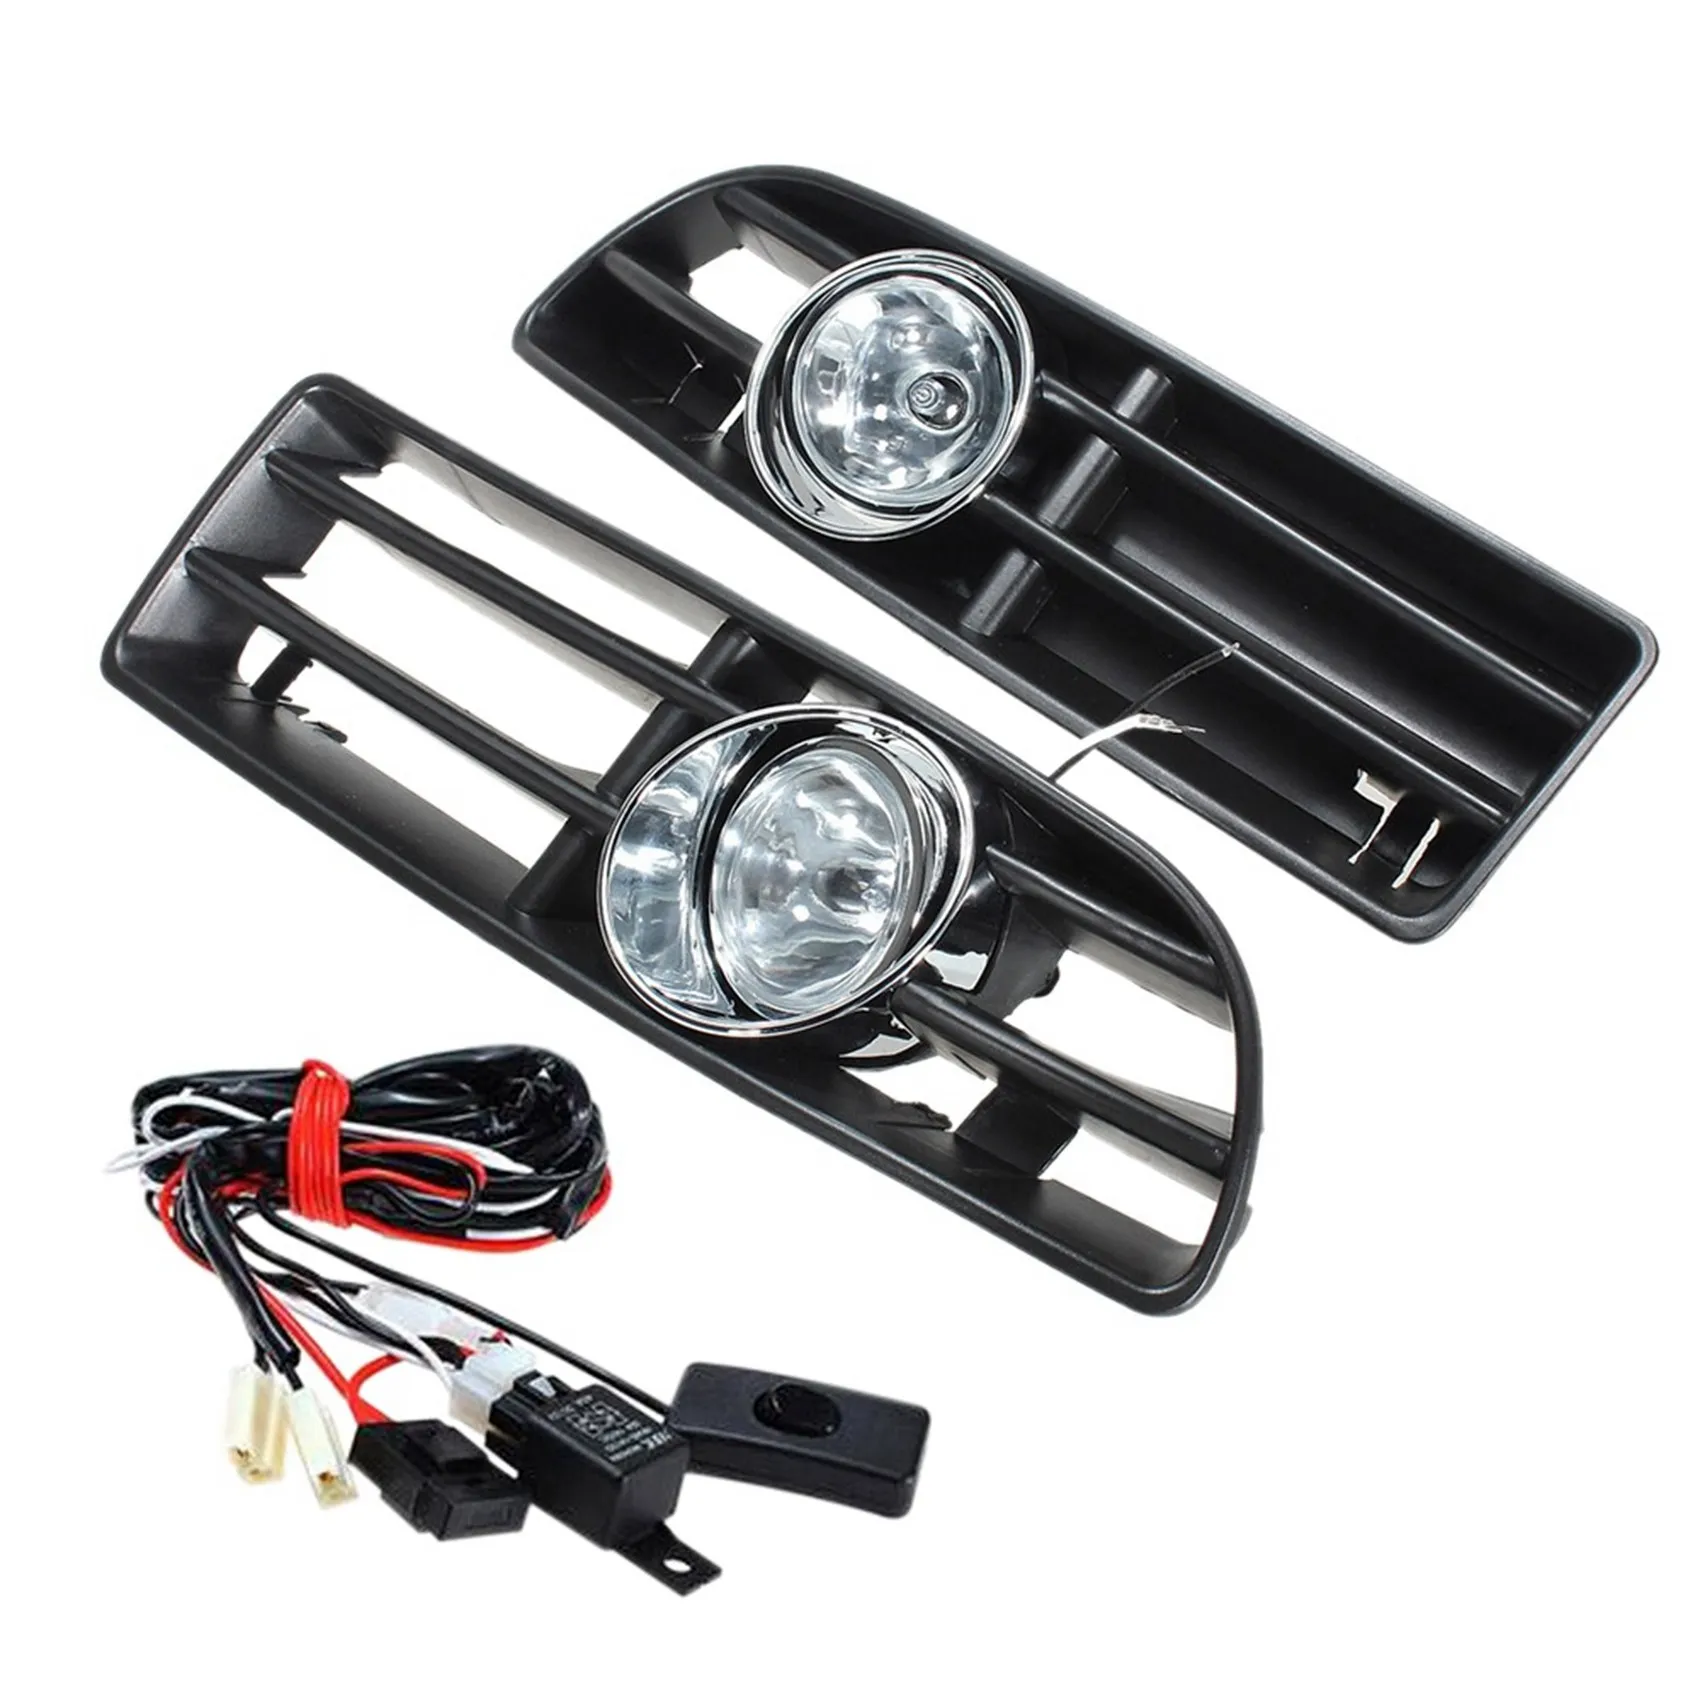 

Front Fog Lights Assembly Fog Lamp Grille with Switch Harness Daytime Running Light for VW Bora Jetta MK4 1998-2004